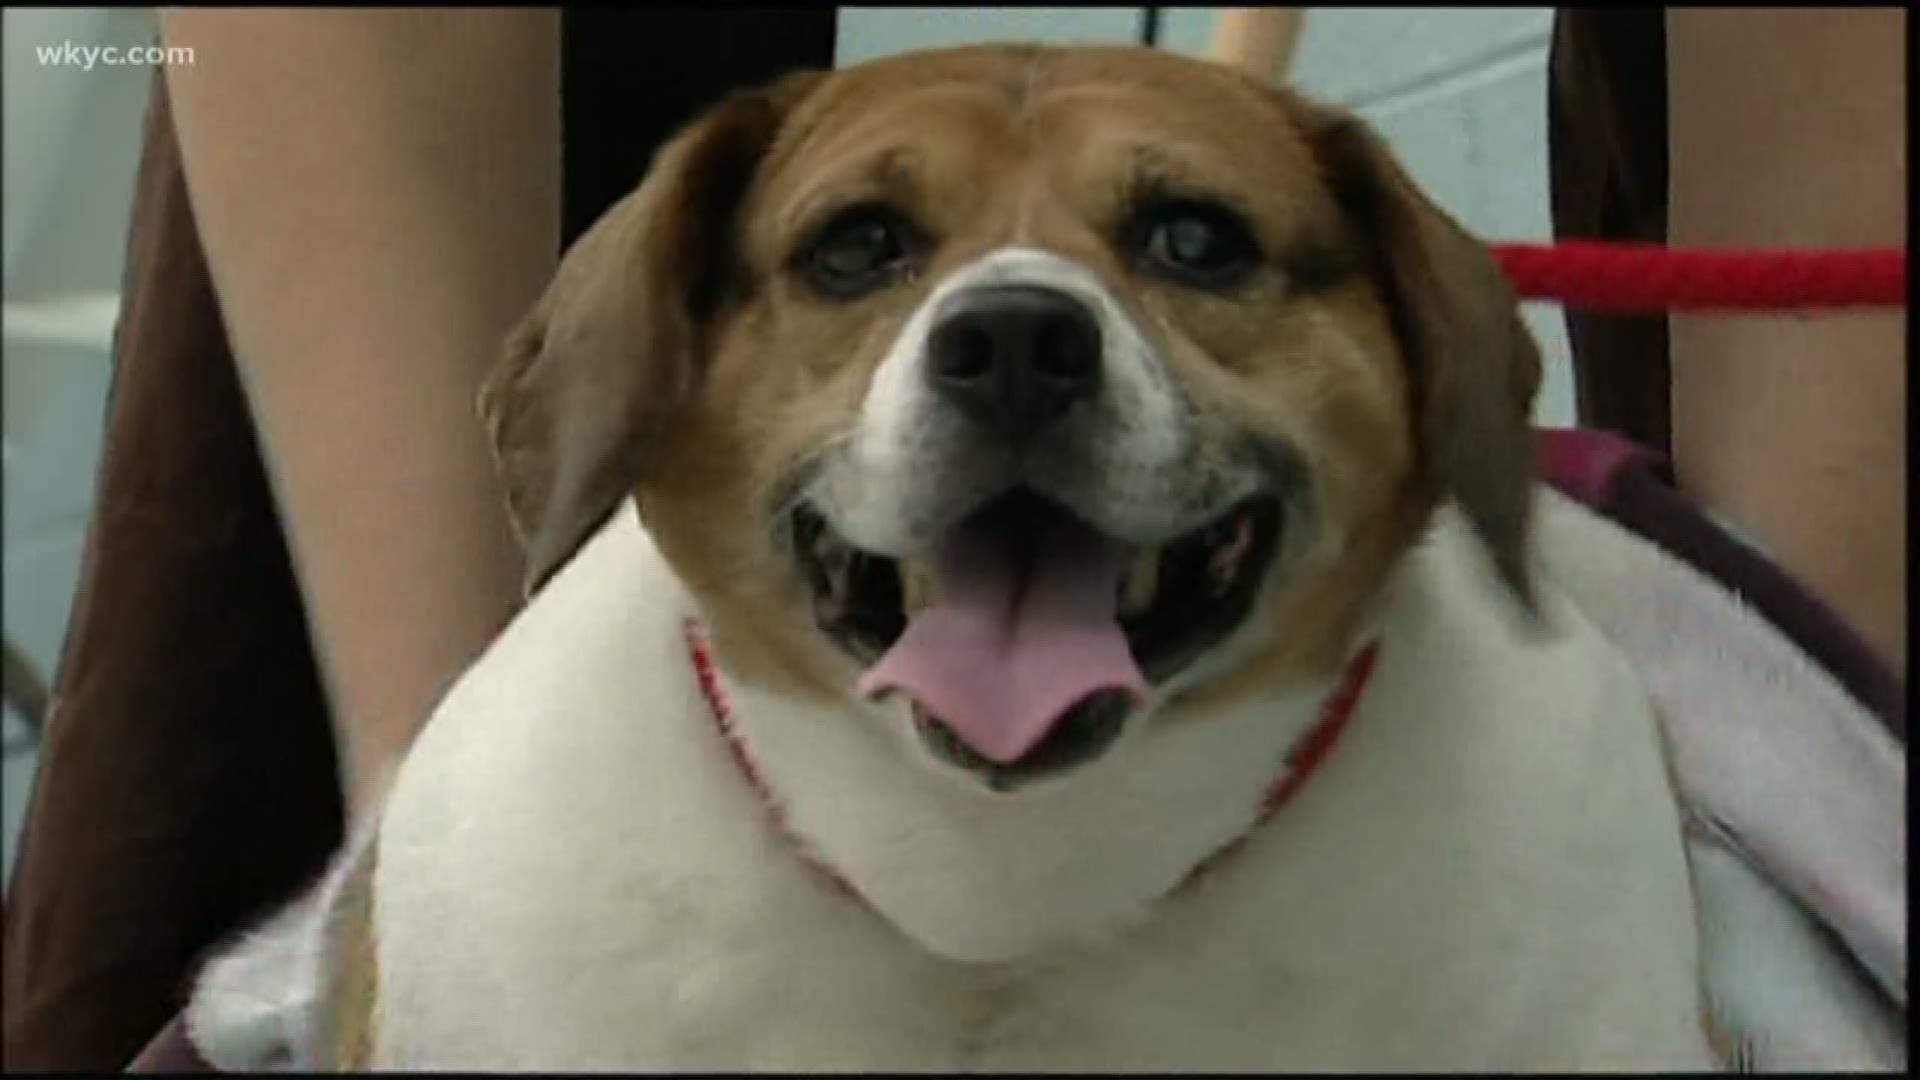 Bark Week: Obesity can be deadly for dogs